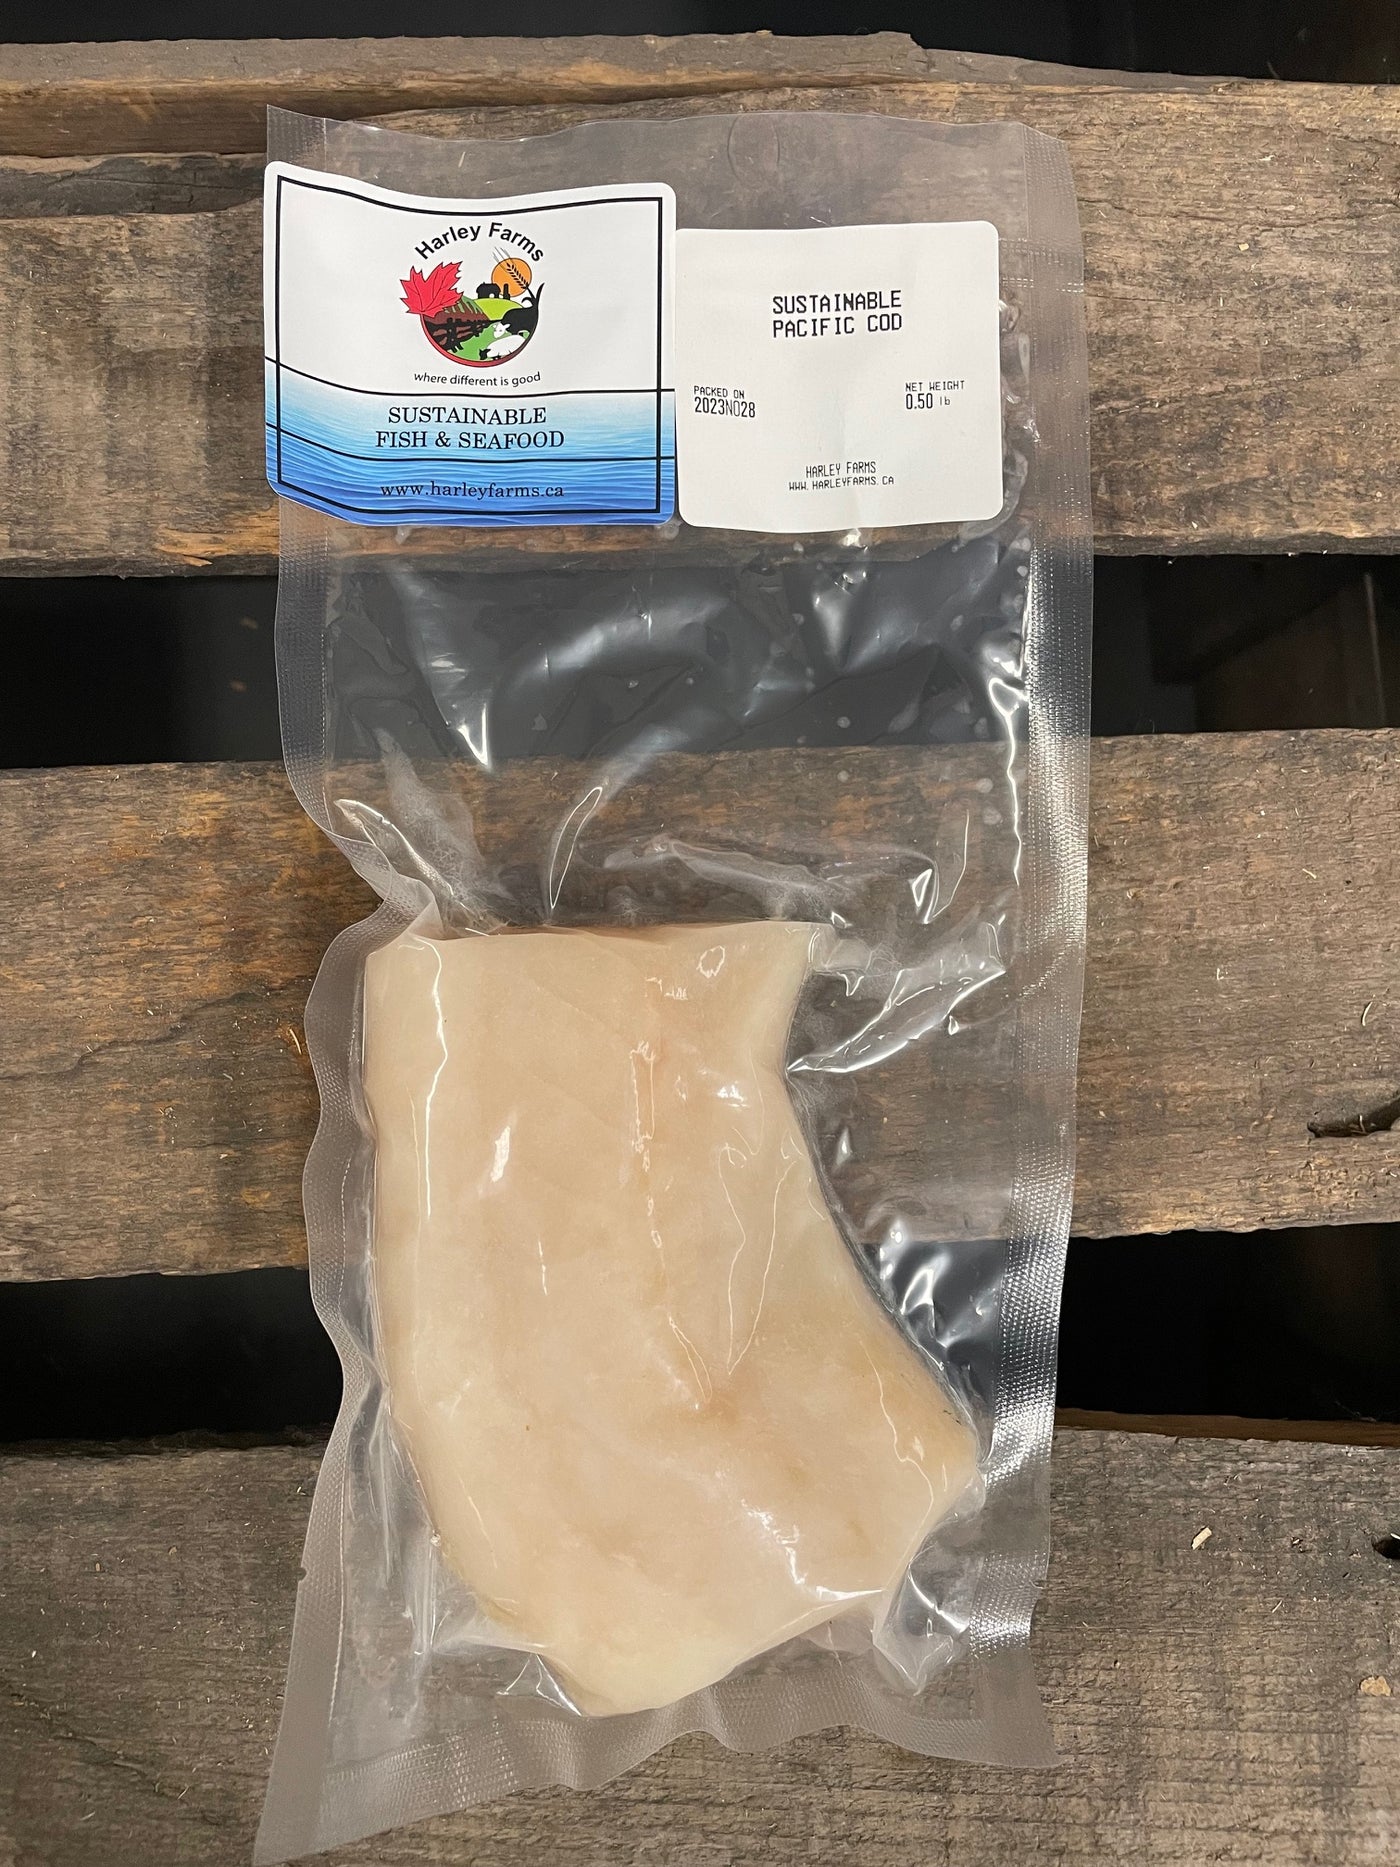 Sustainable Pacific Cod